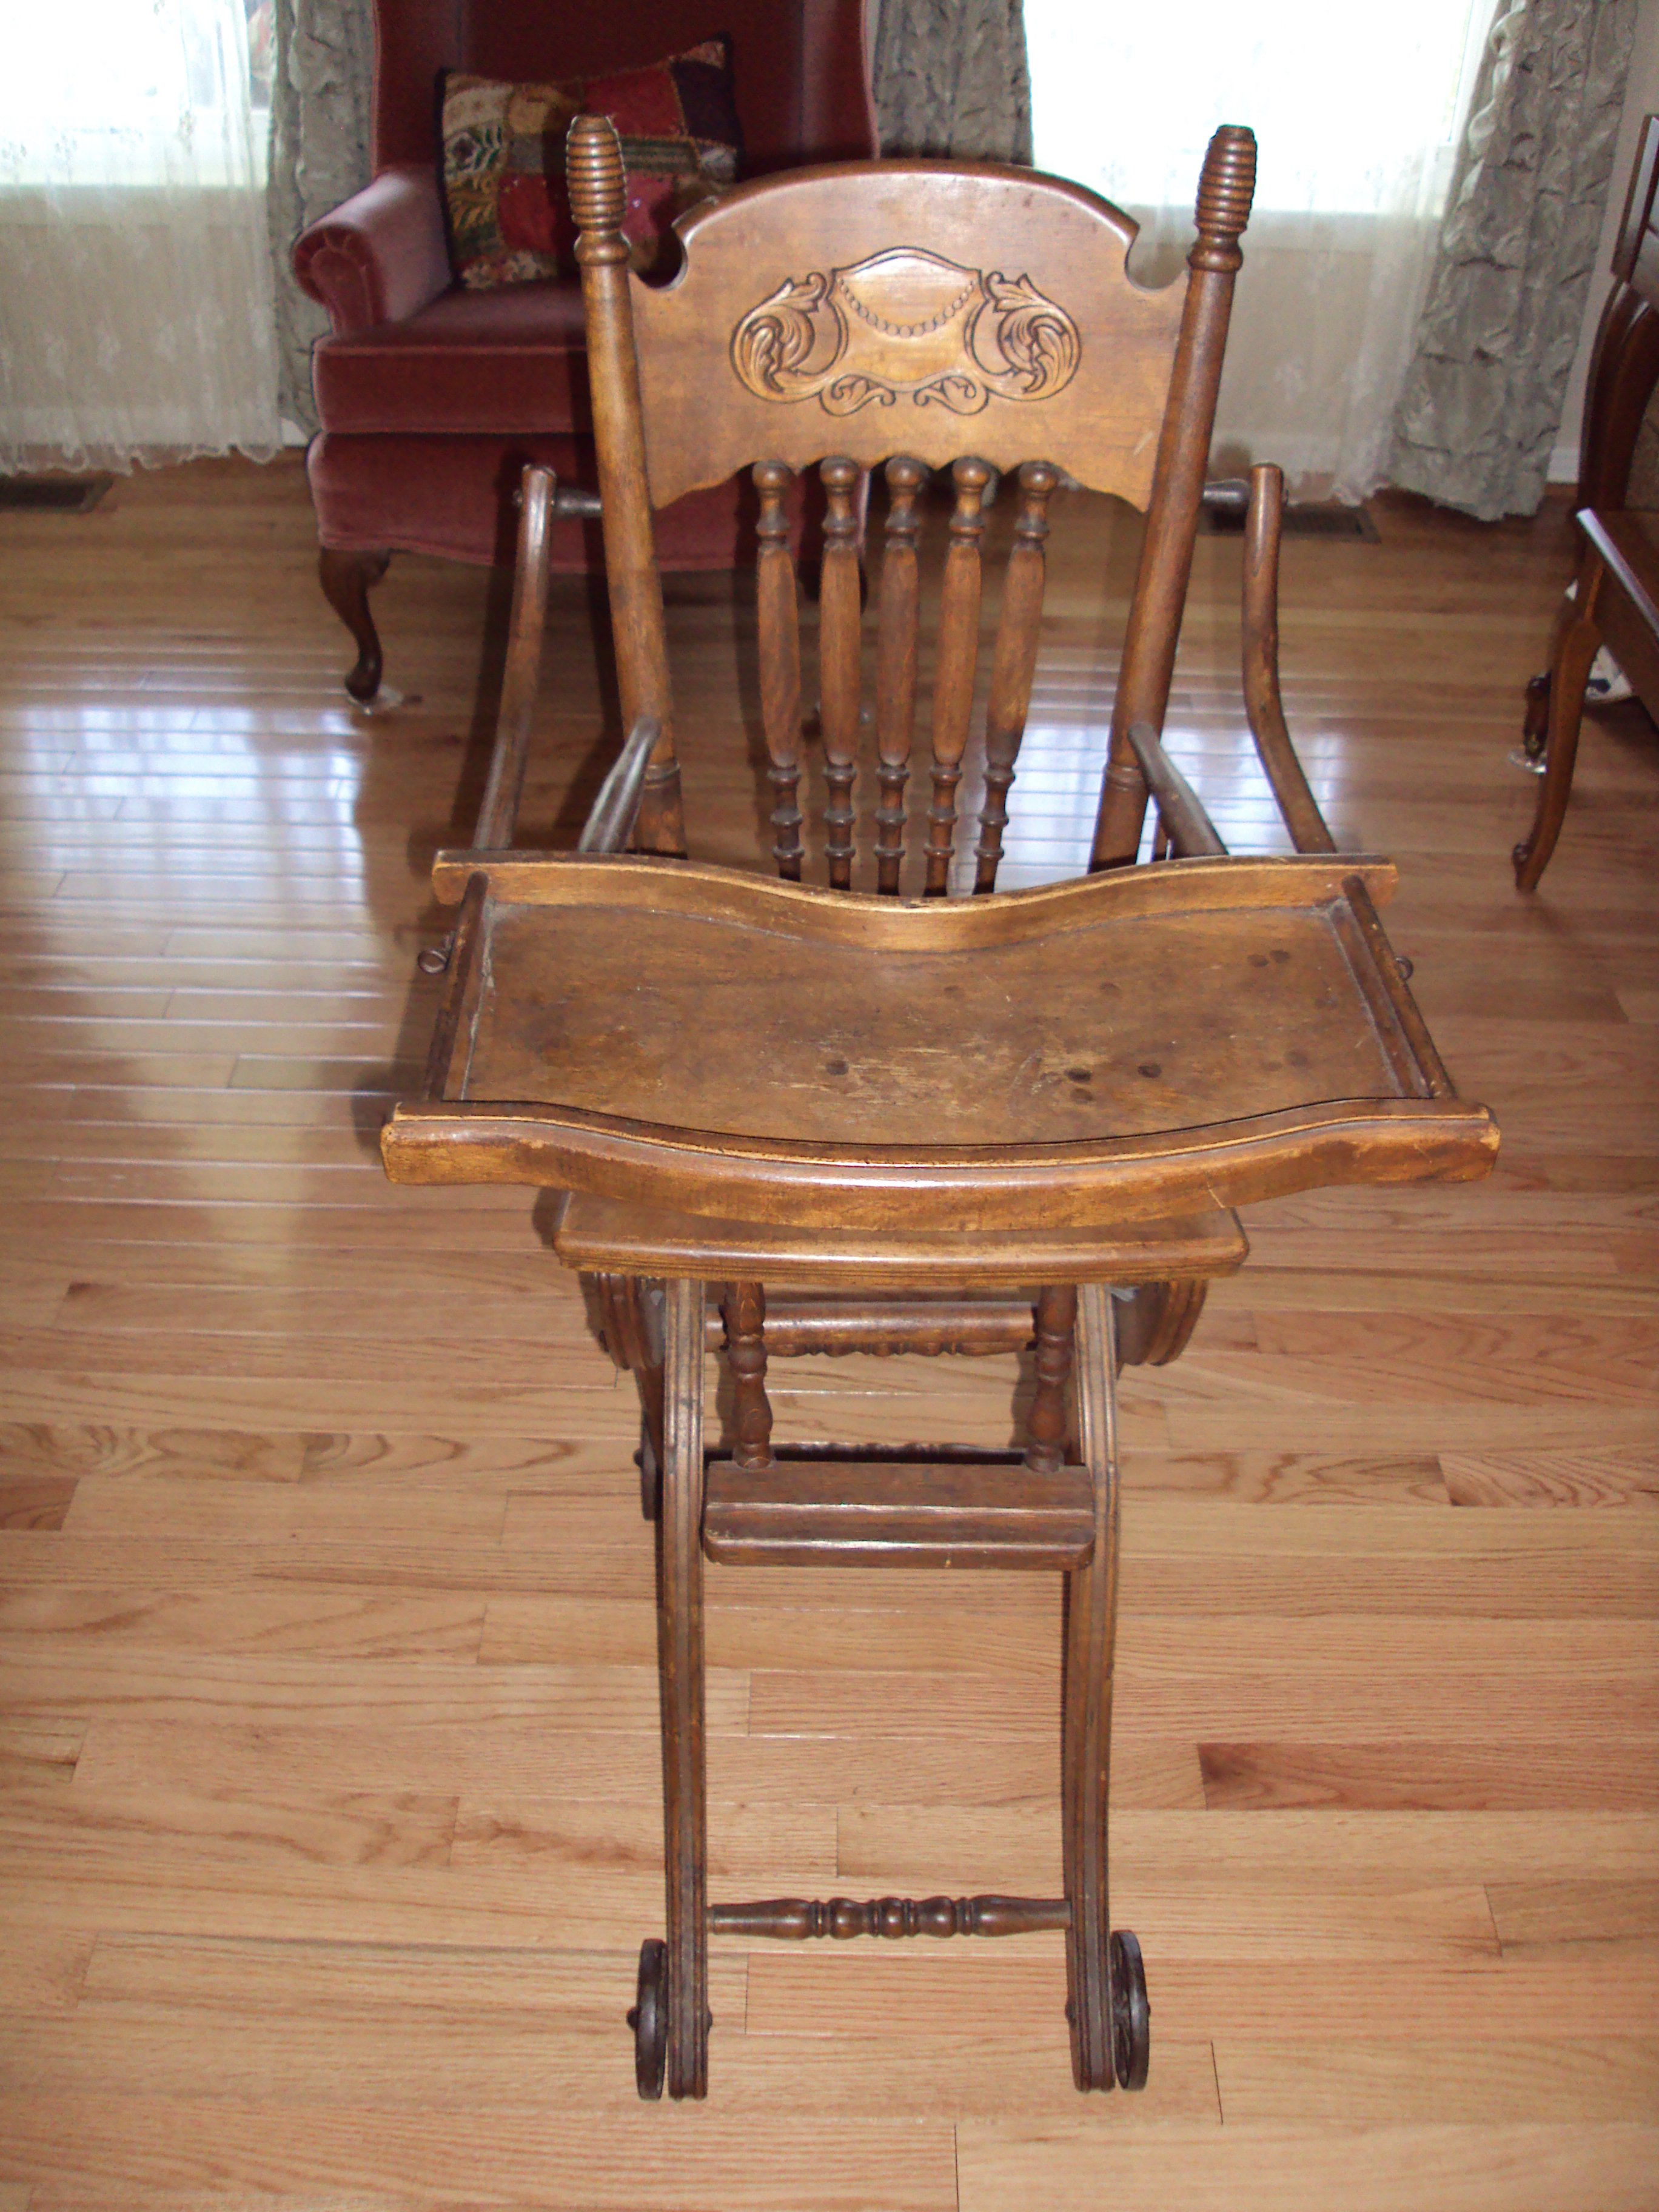 Victorian Era Convertible Stroller High Chair For Sale Antiques